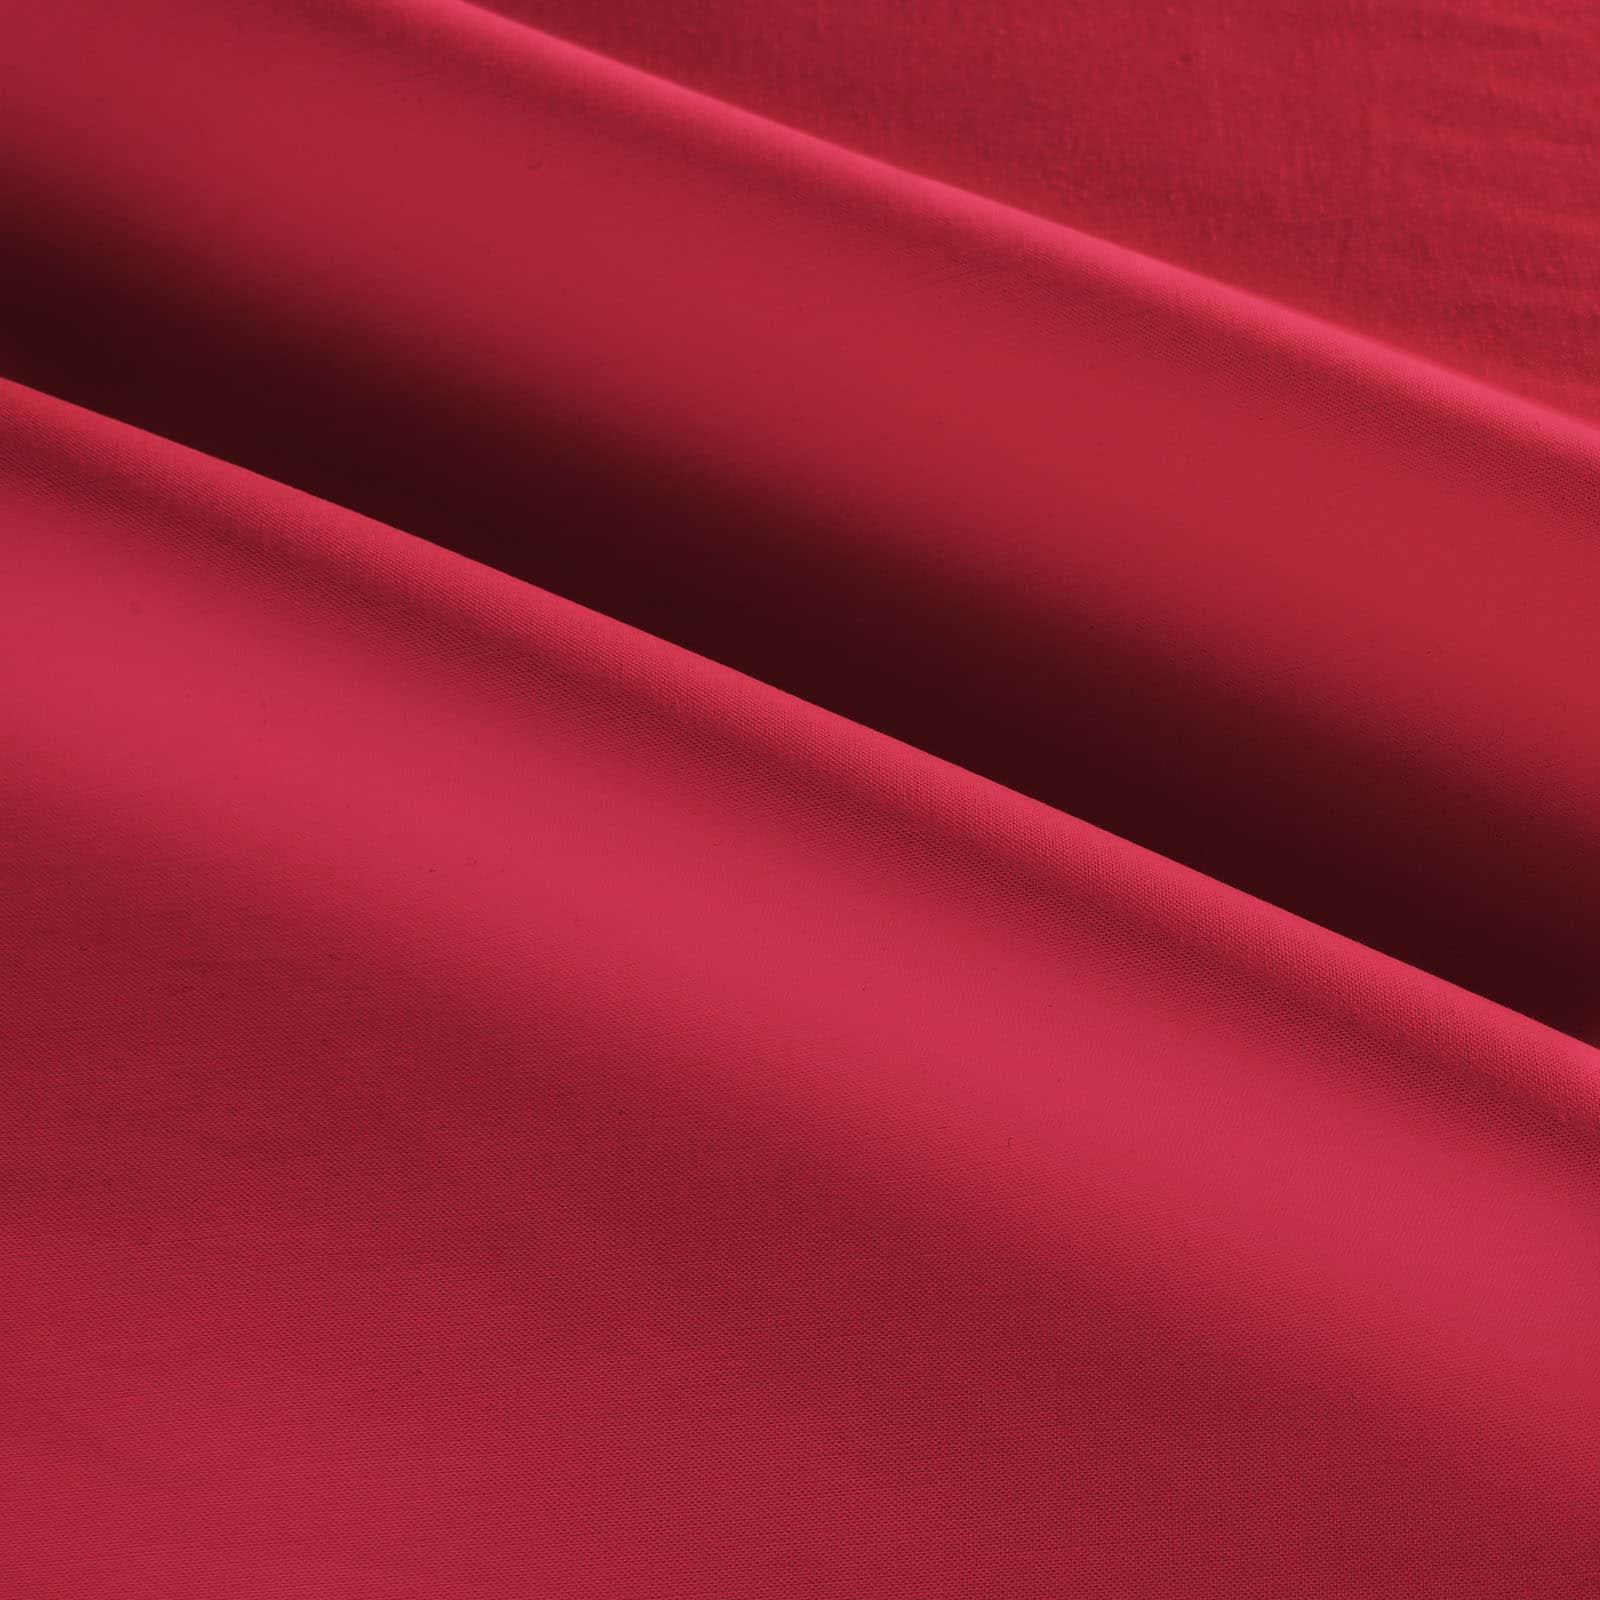 Springs Creative Red Solid Cotton Fabric